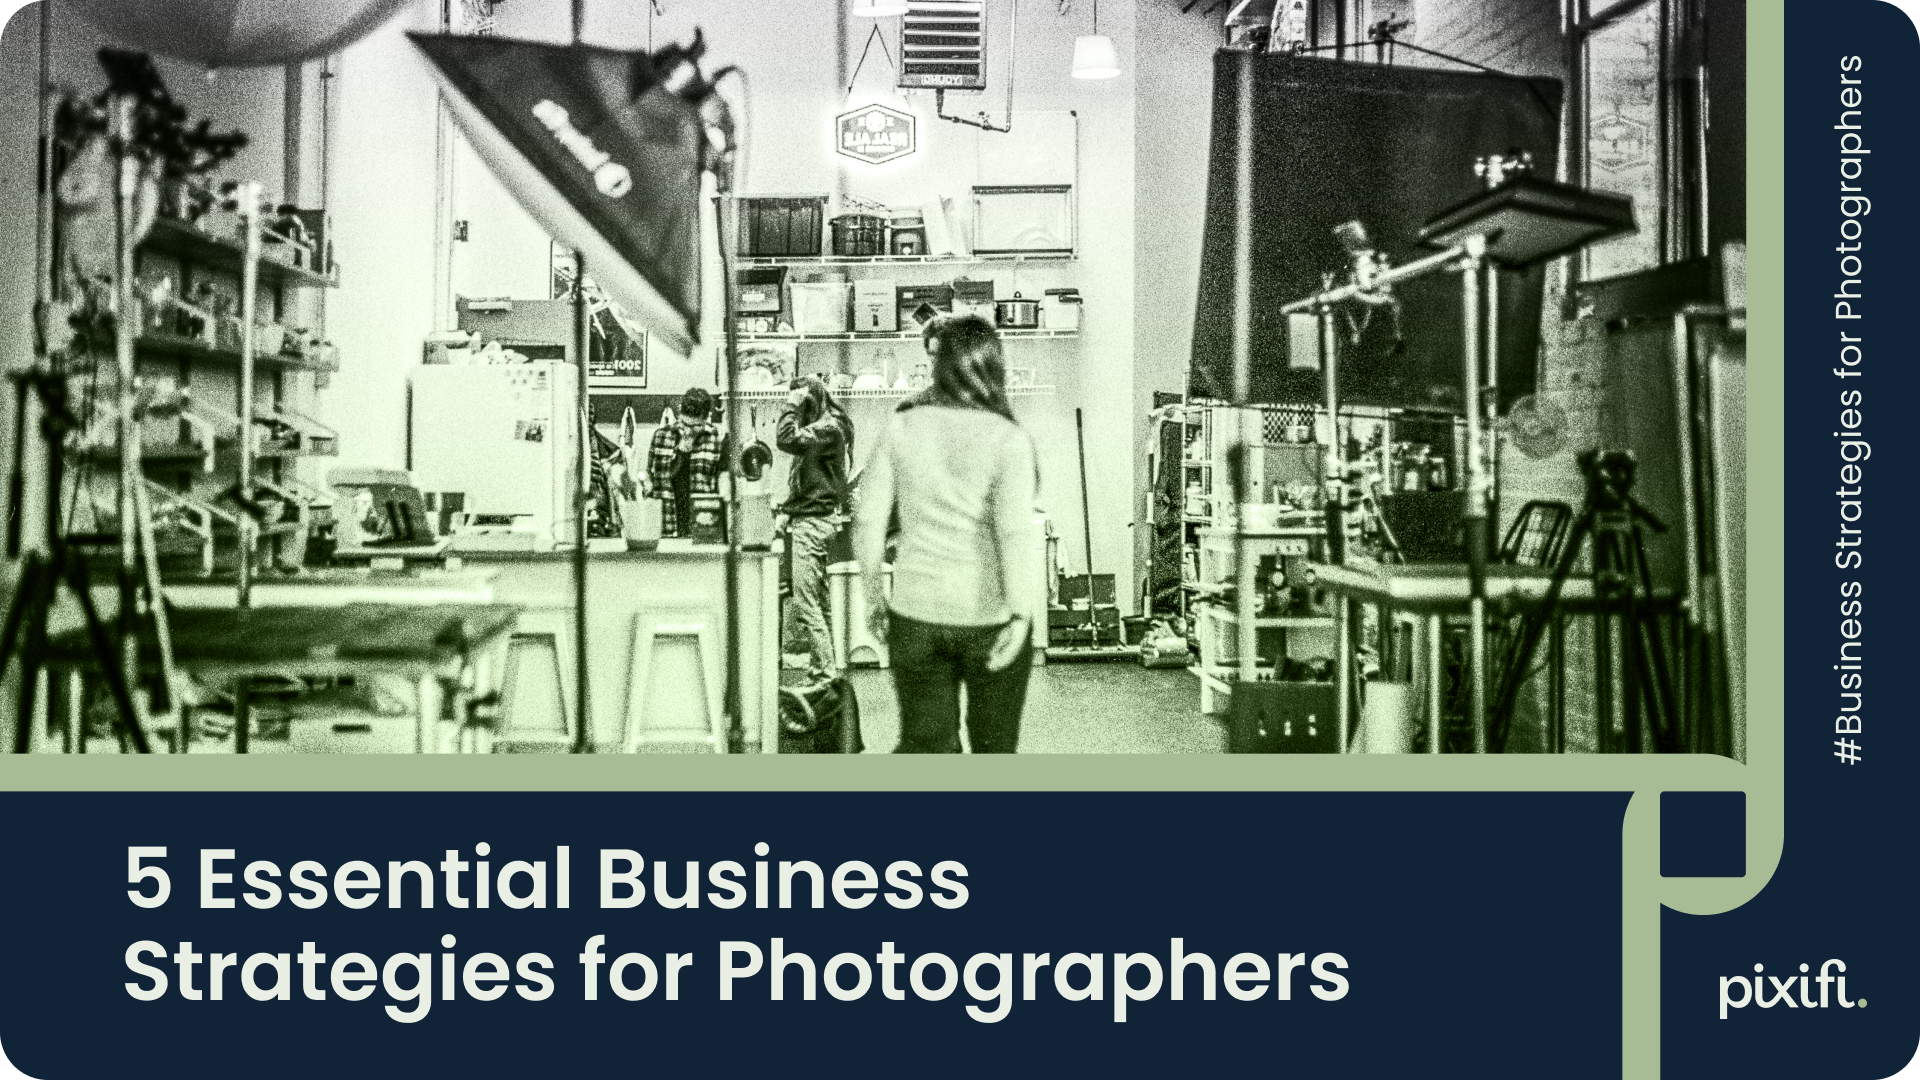 5 Essential Business Strategies for Photographers